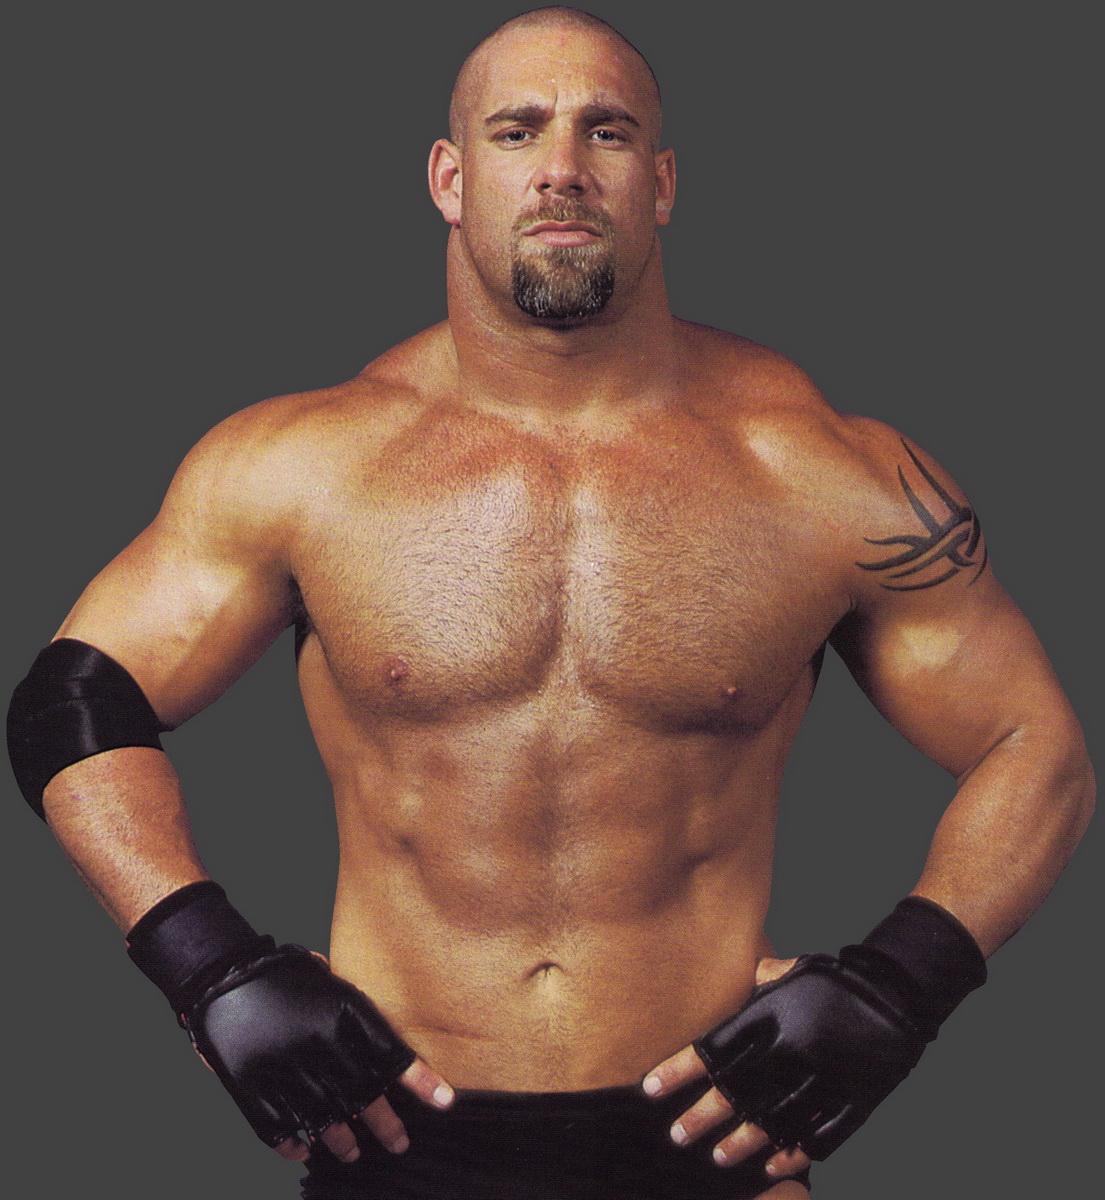 Pictures of Bill Goldberg.